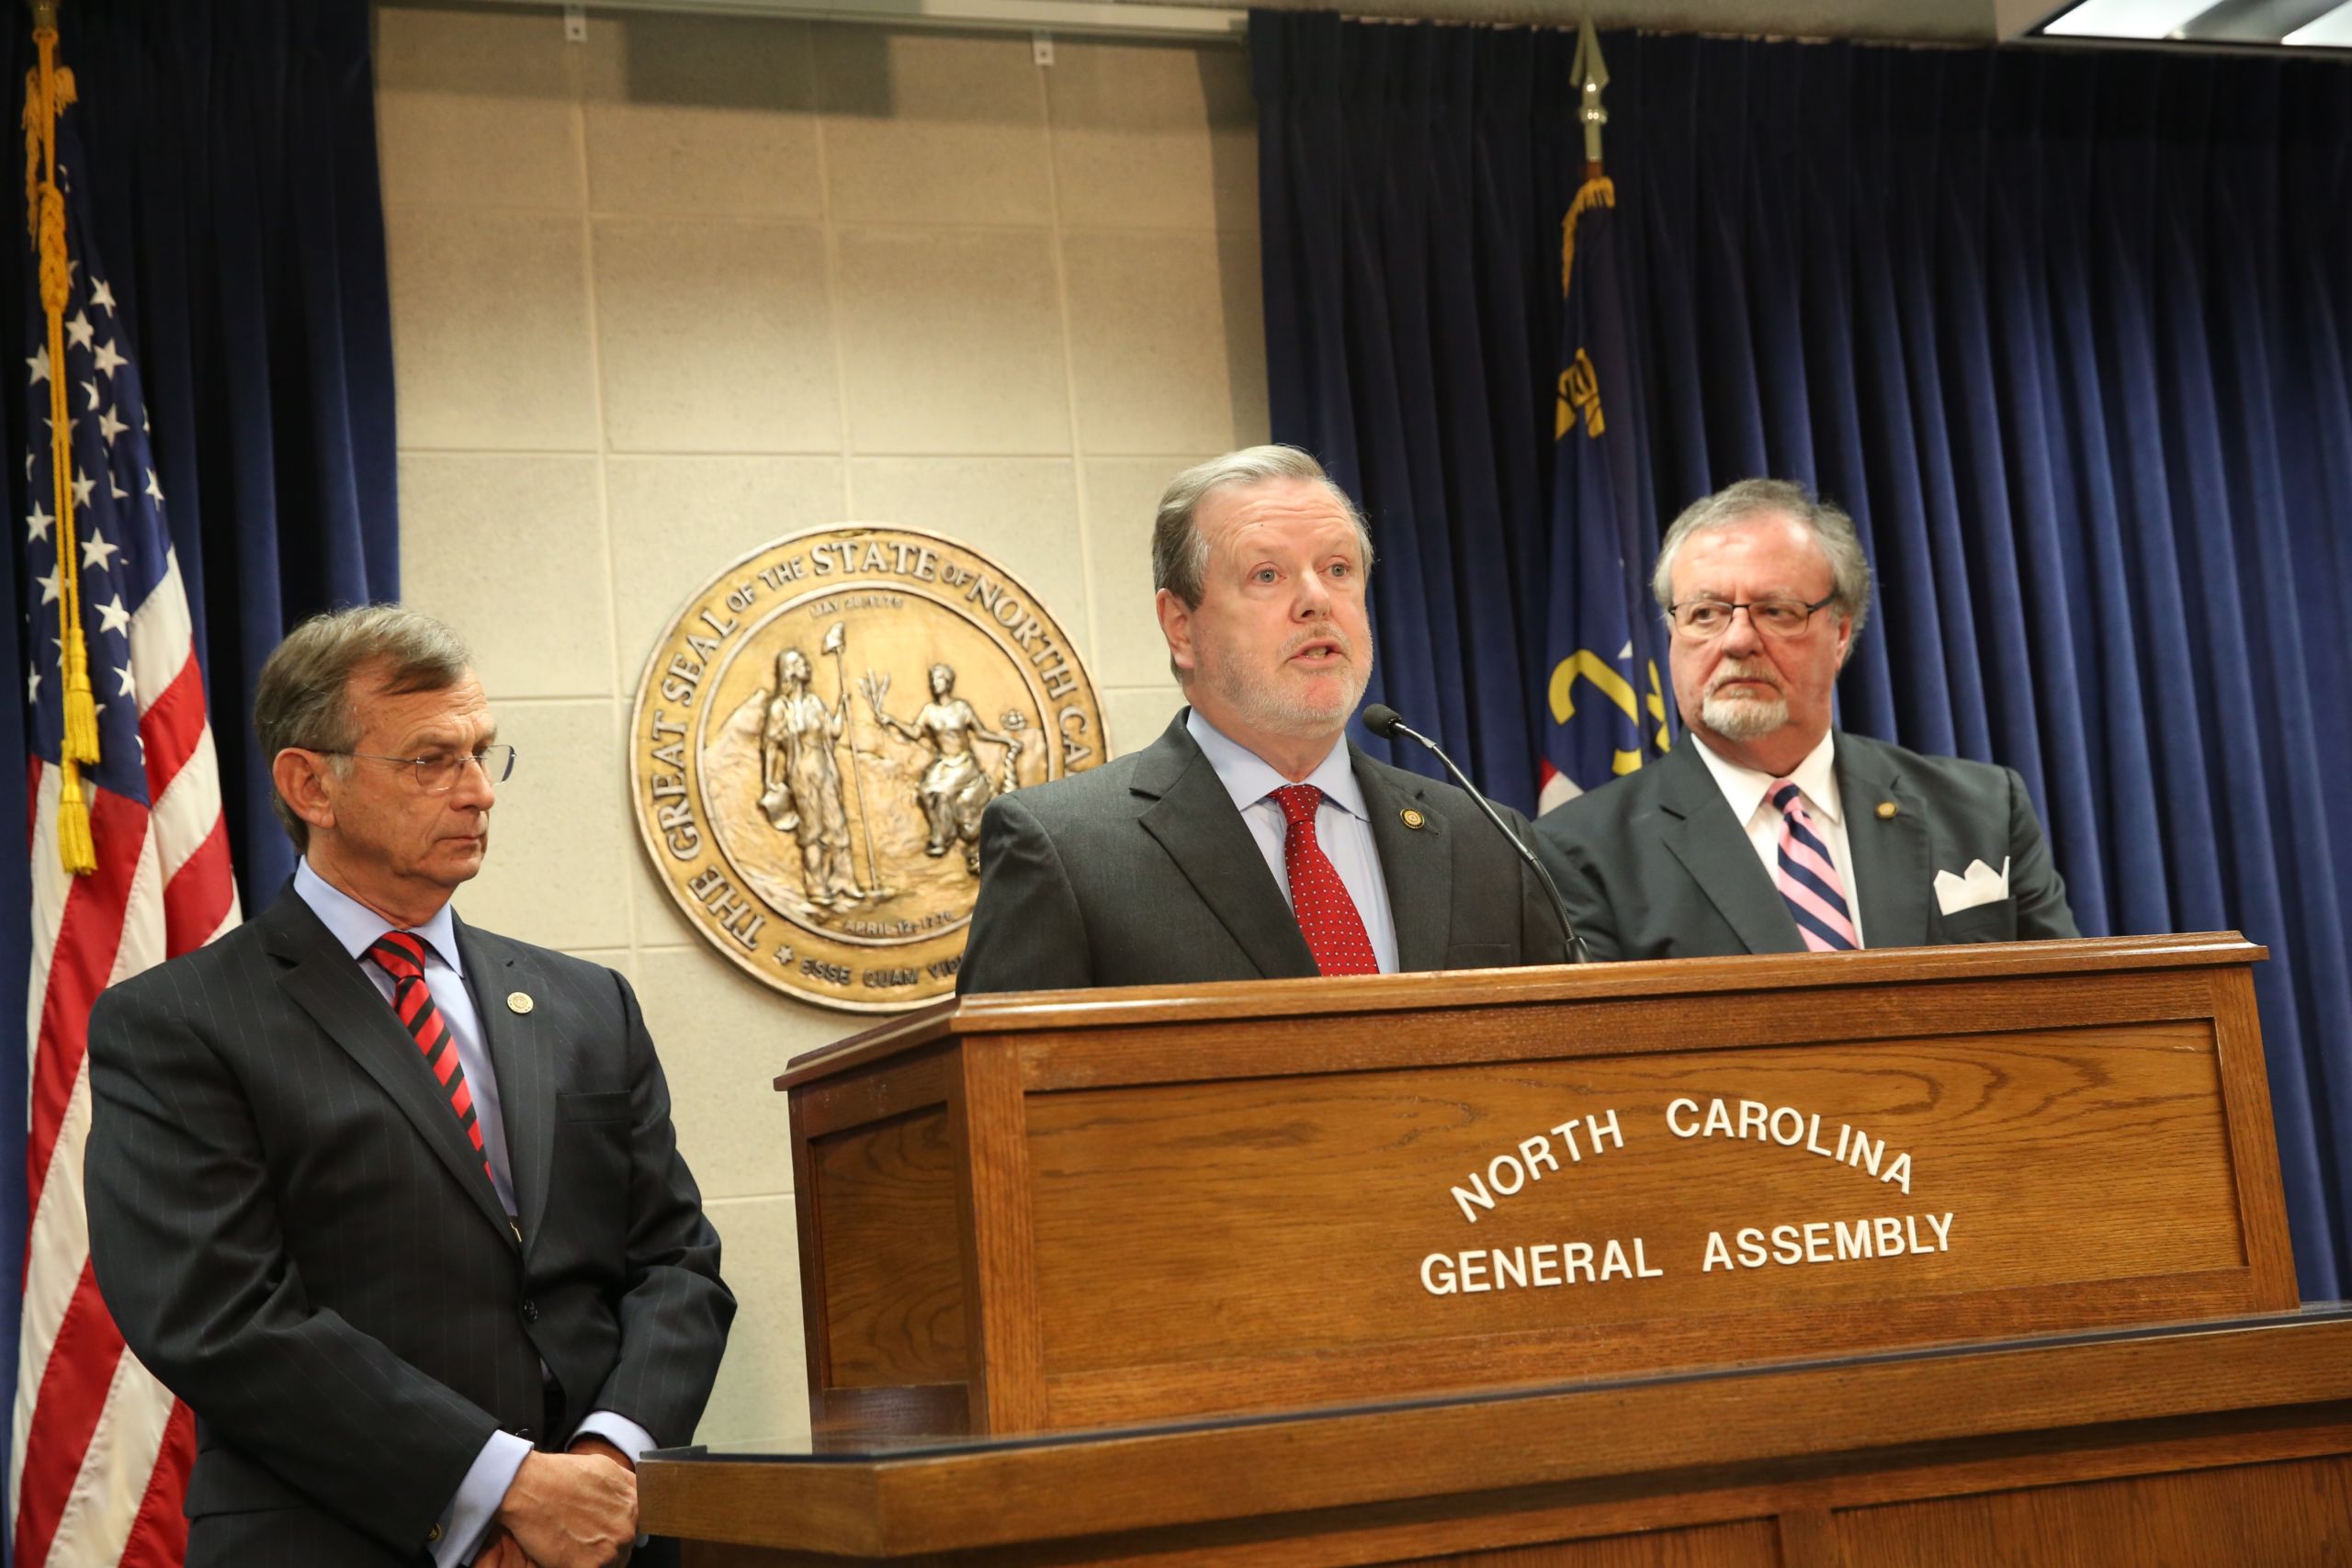 Senate leader Phil Berger, flanked by Sens. Bill Rabon (left) and Tommy Tucker (right), explain at a Feb. 23 press conference steps the Senate may take to compel Larry Hall's attendance at his confirmation hearing. (CJ Photo by Don Carrington)